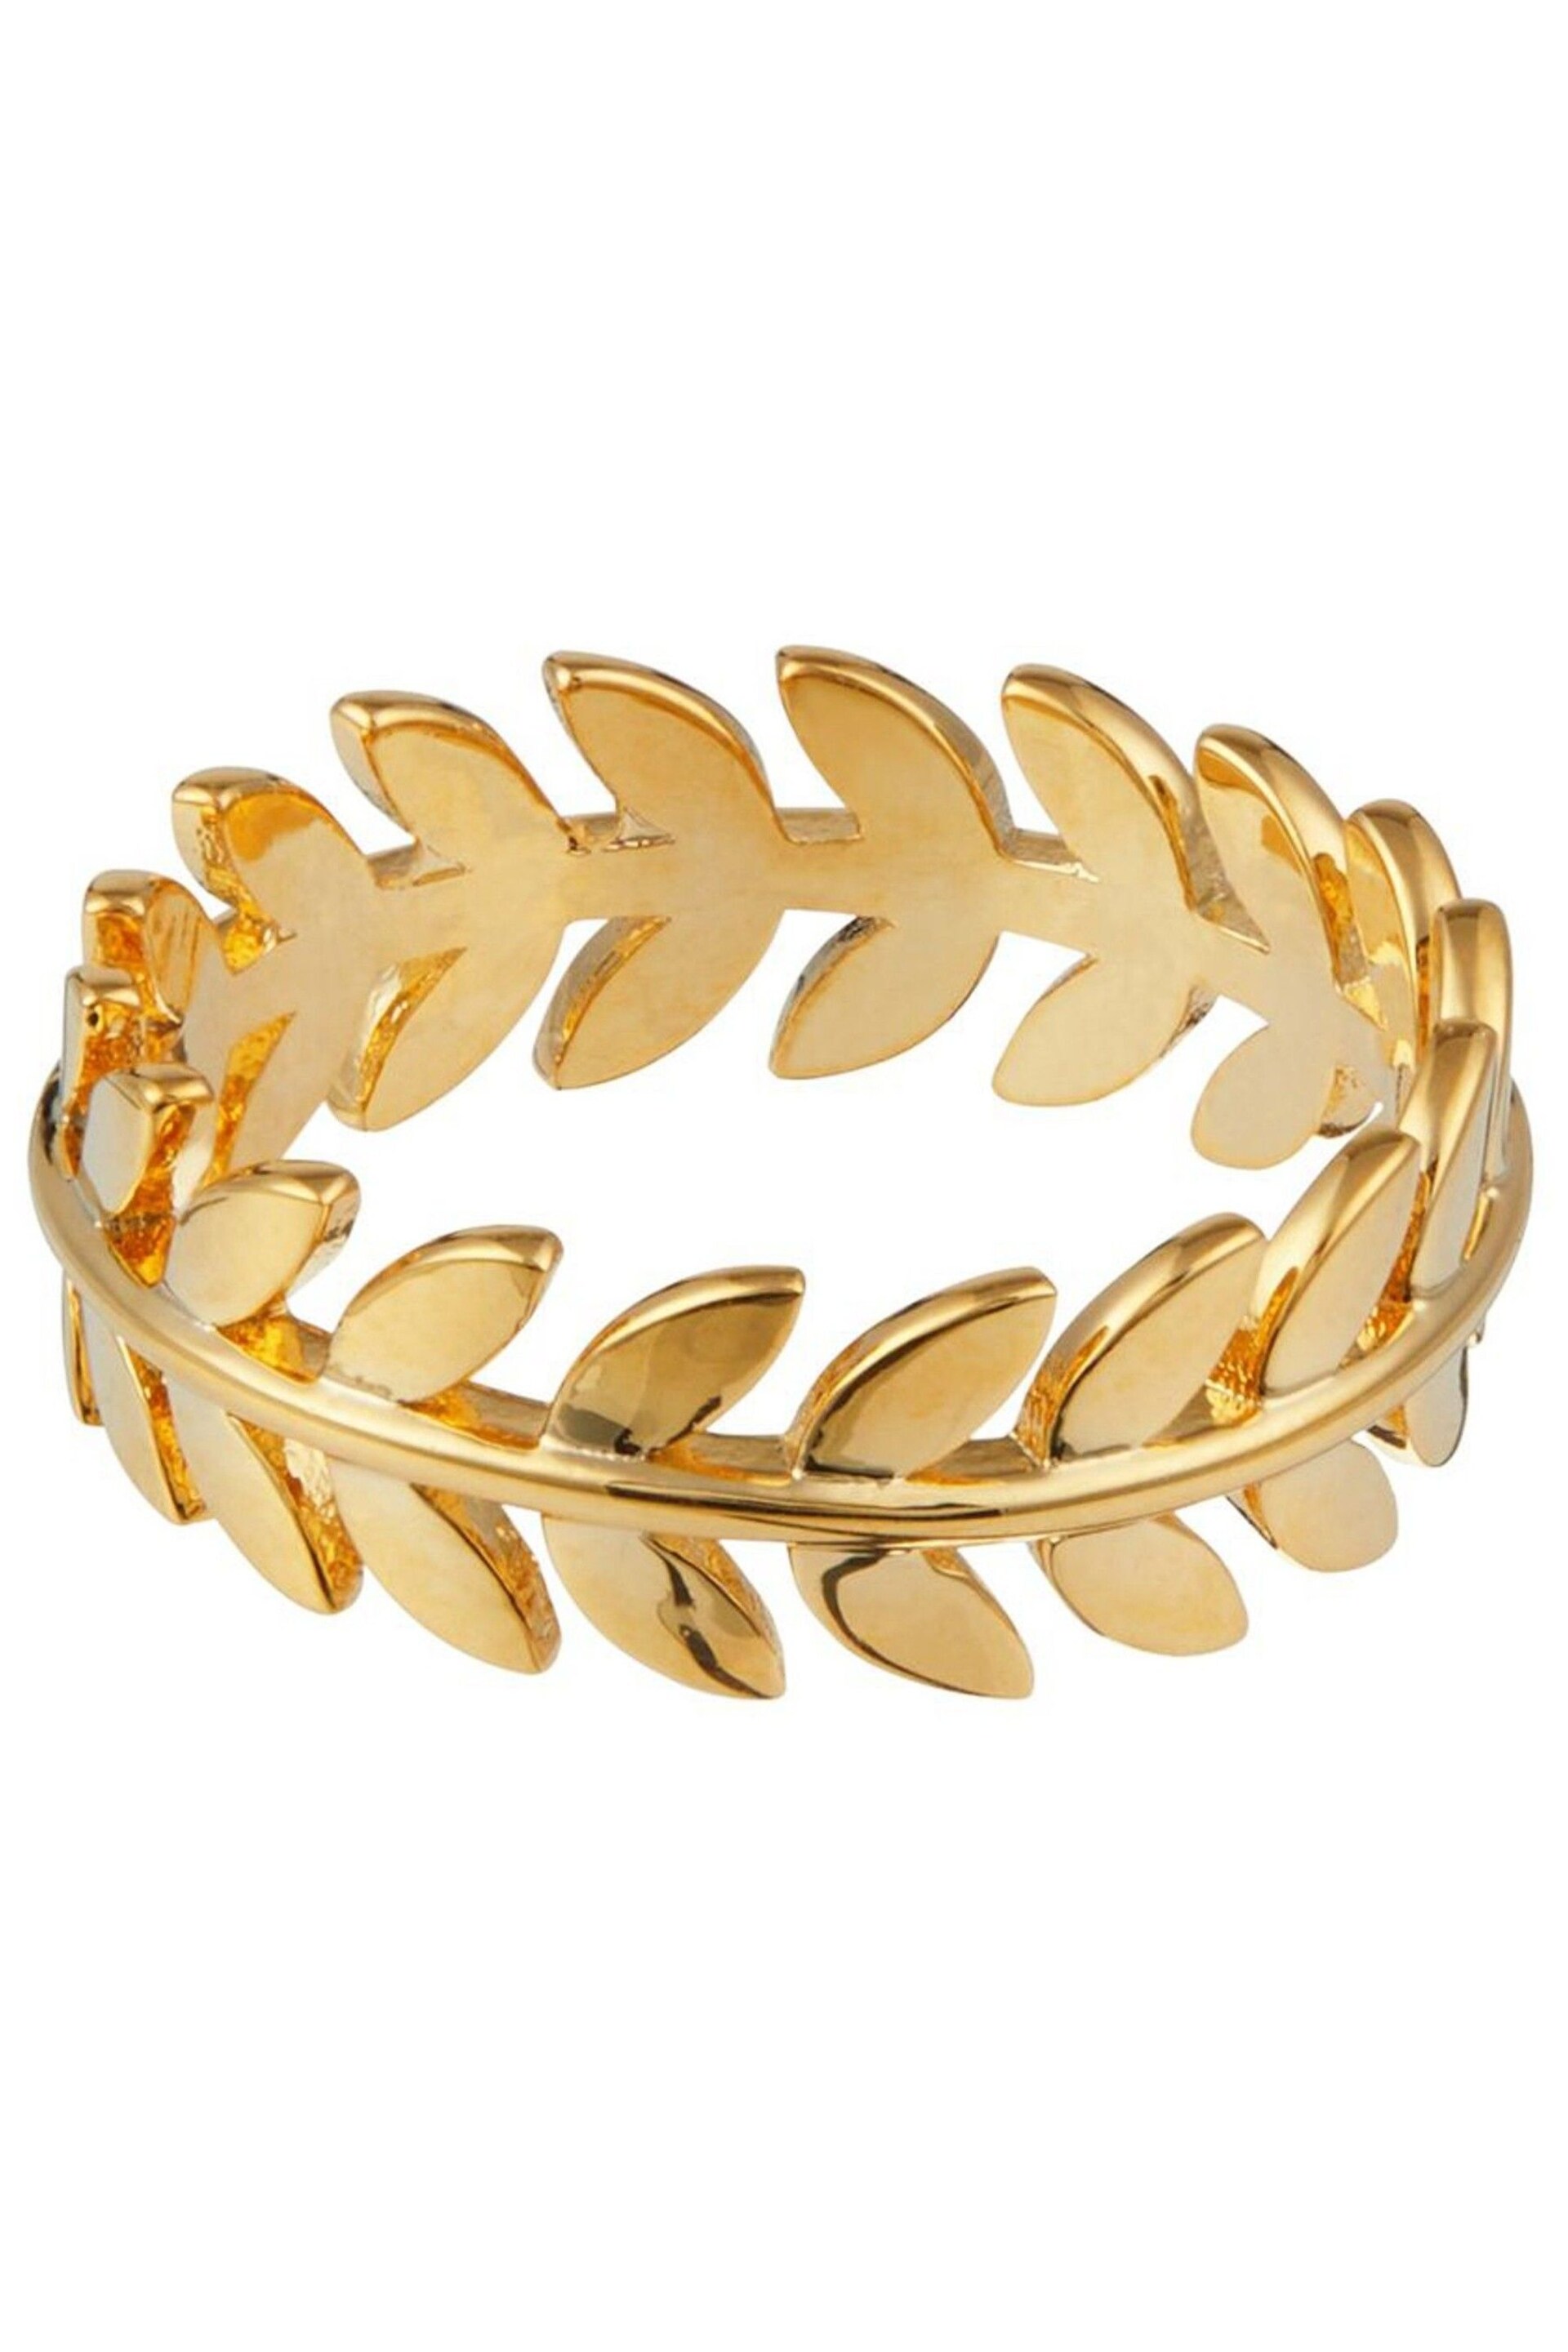 Orelia London Gold Plated Metal Leaf Ring - Image 1 of 1